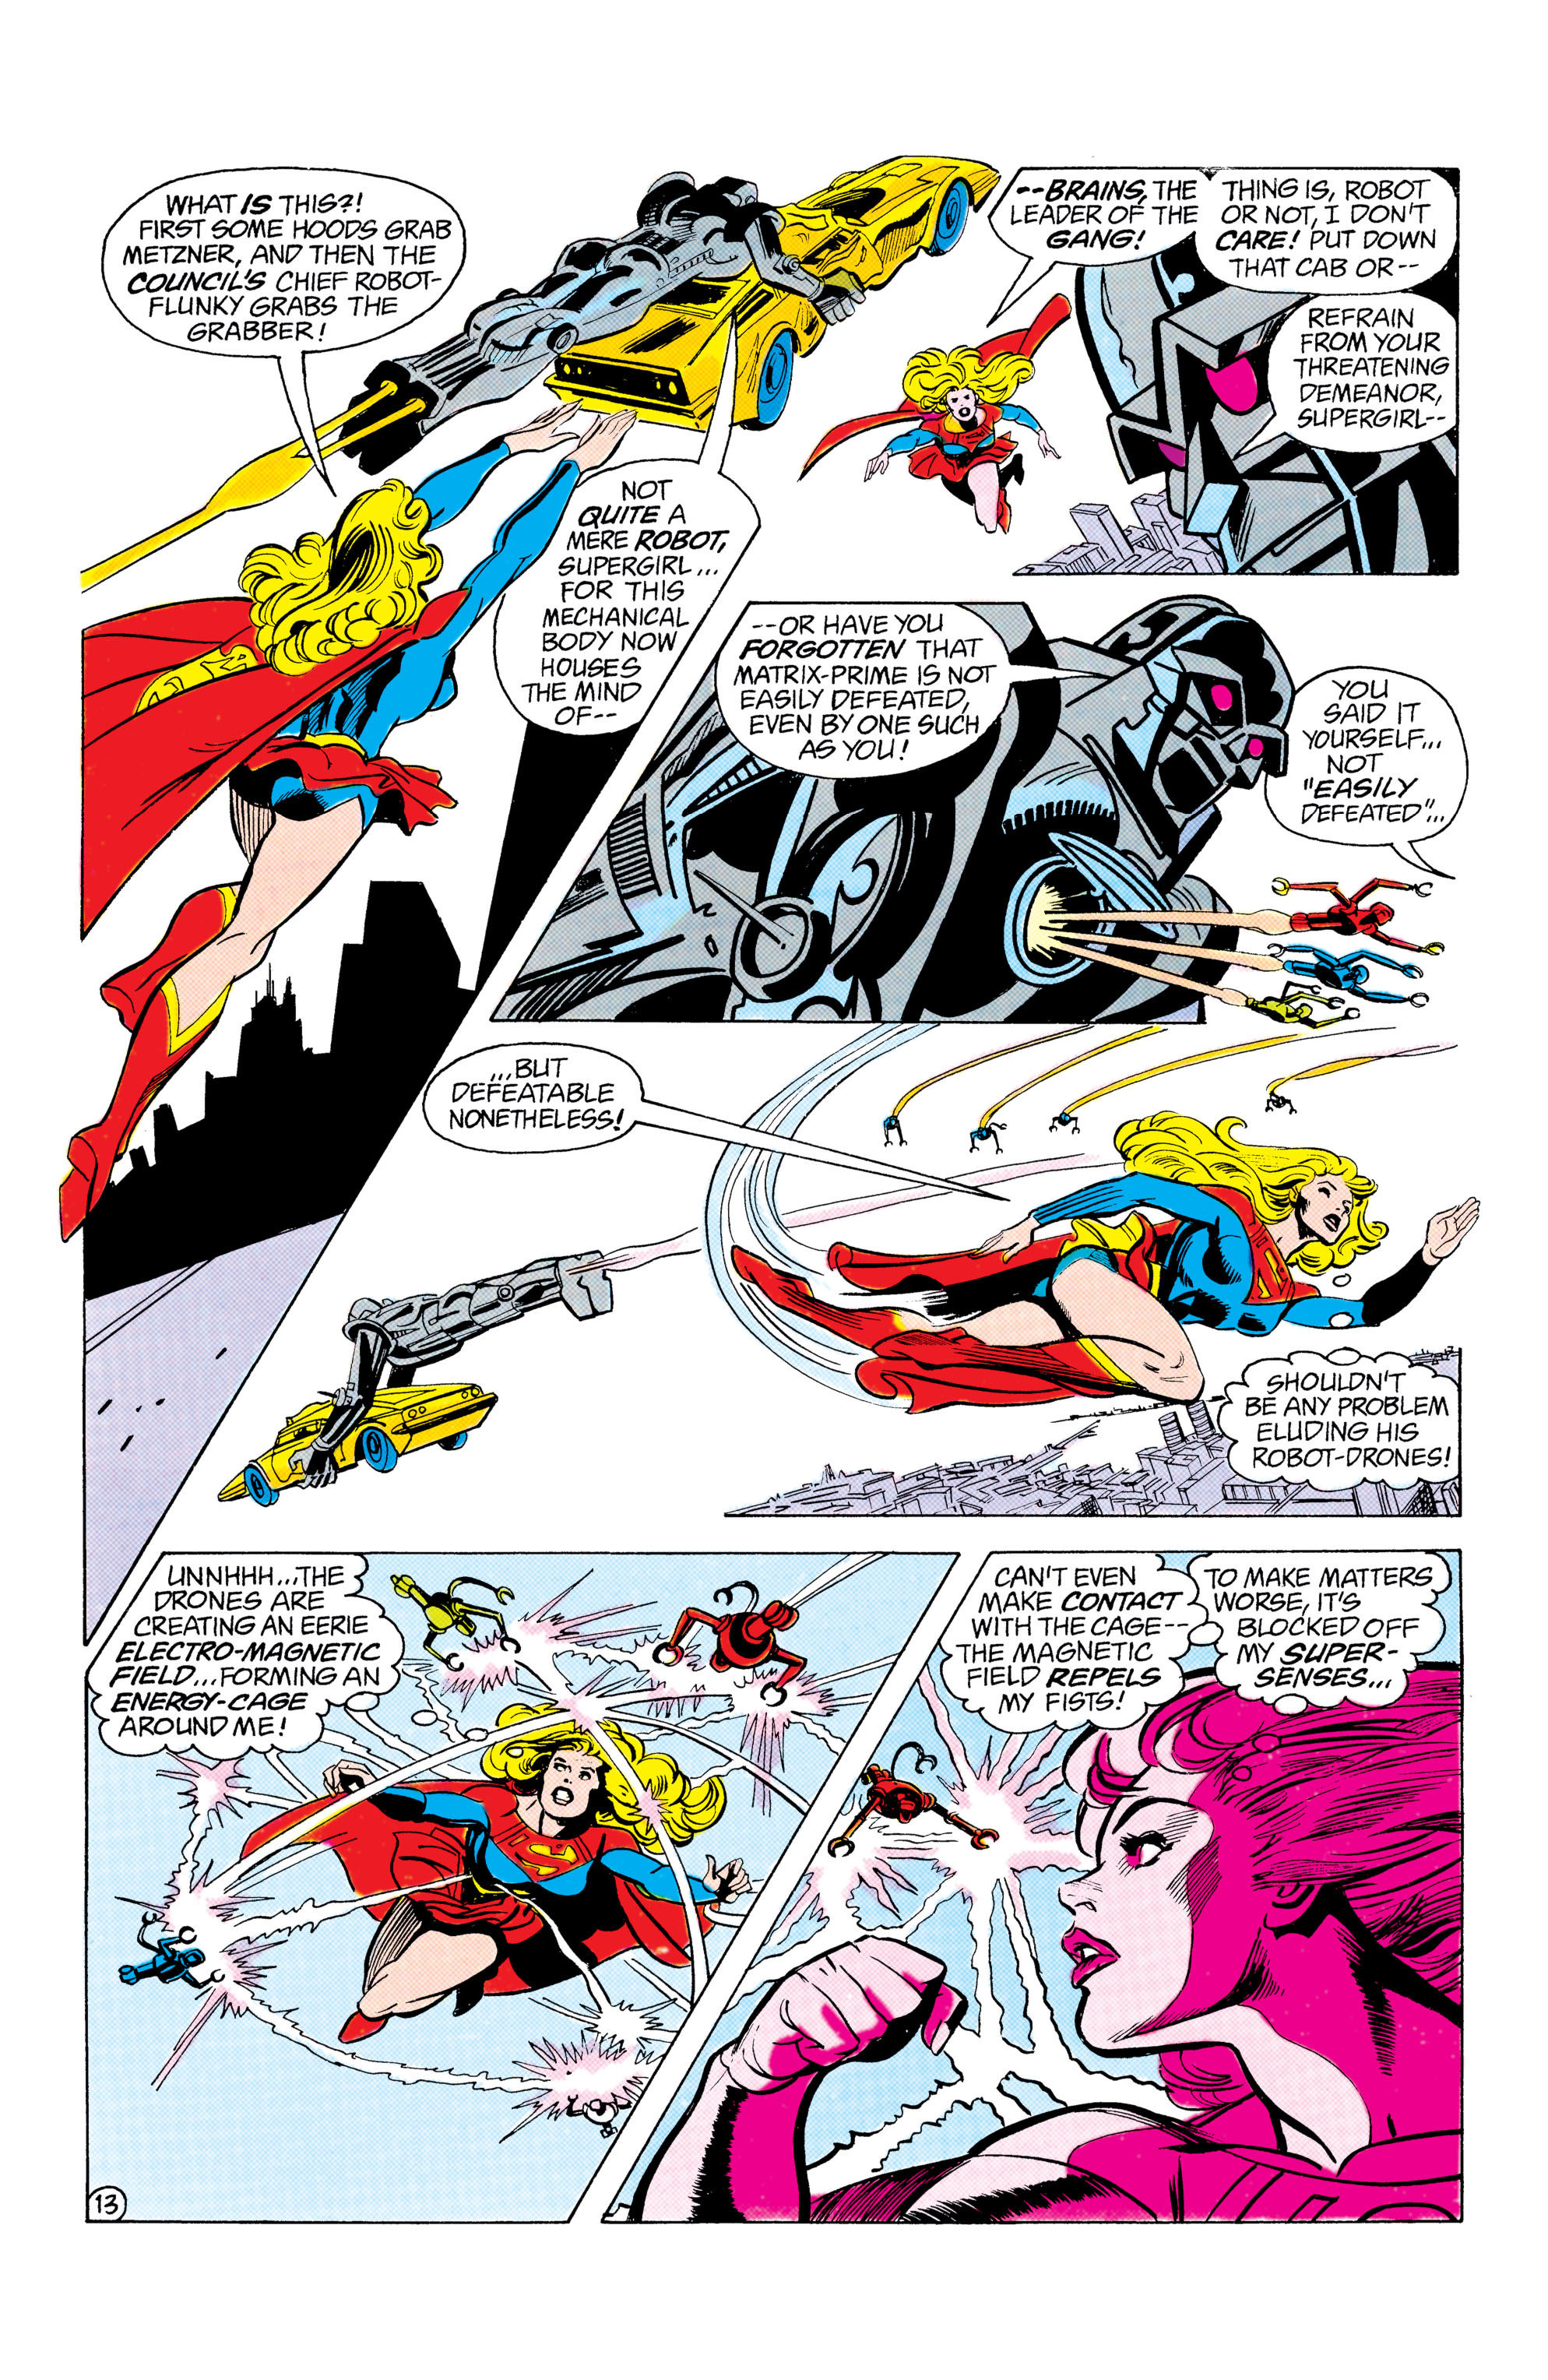 Supergirl (1982) 17 Page 13